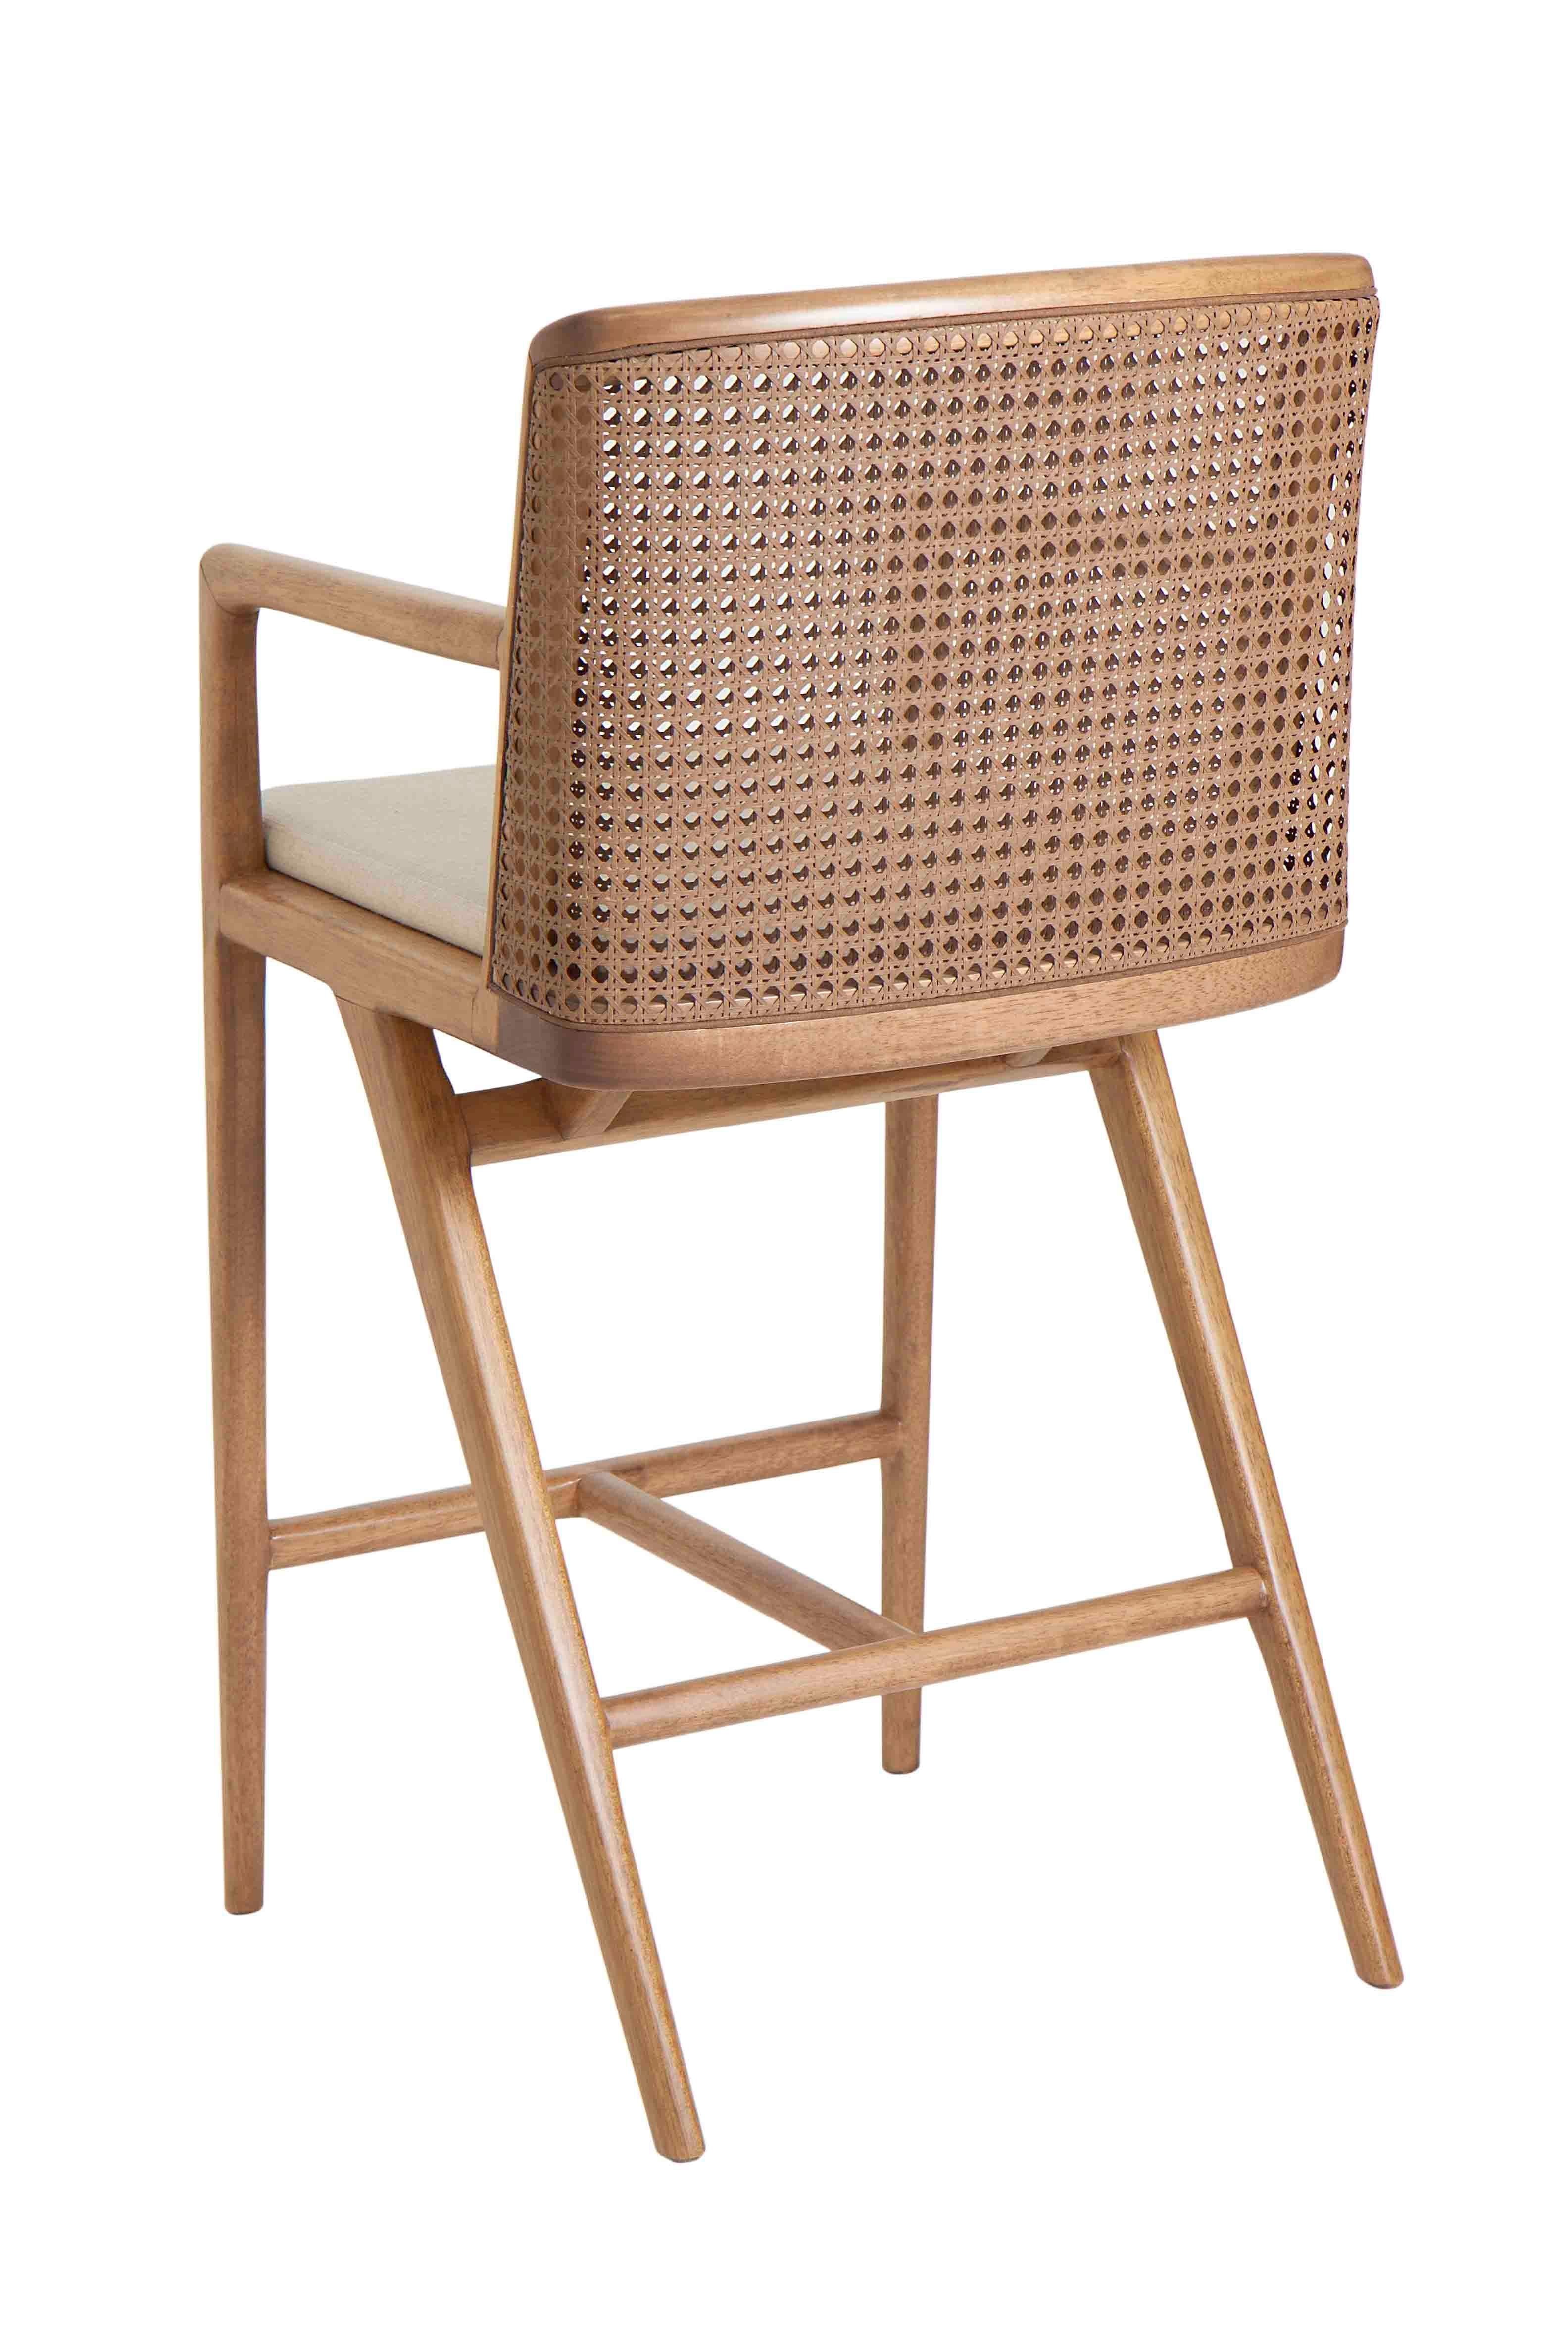 Beautiful in every detail. The caned backrest adds lightness to the piece.

Item Details:
Structure: Wood Freijo
Upholstery: Caramel Eco Leather 
Backrest: Straw

NOTE: THE IMAGES ARE ILLUSTRATIVE, THE FINISHES ARE IN THE LAST PHOTO.
COLORS MAY VARY